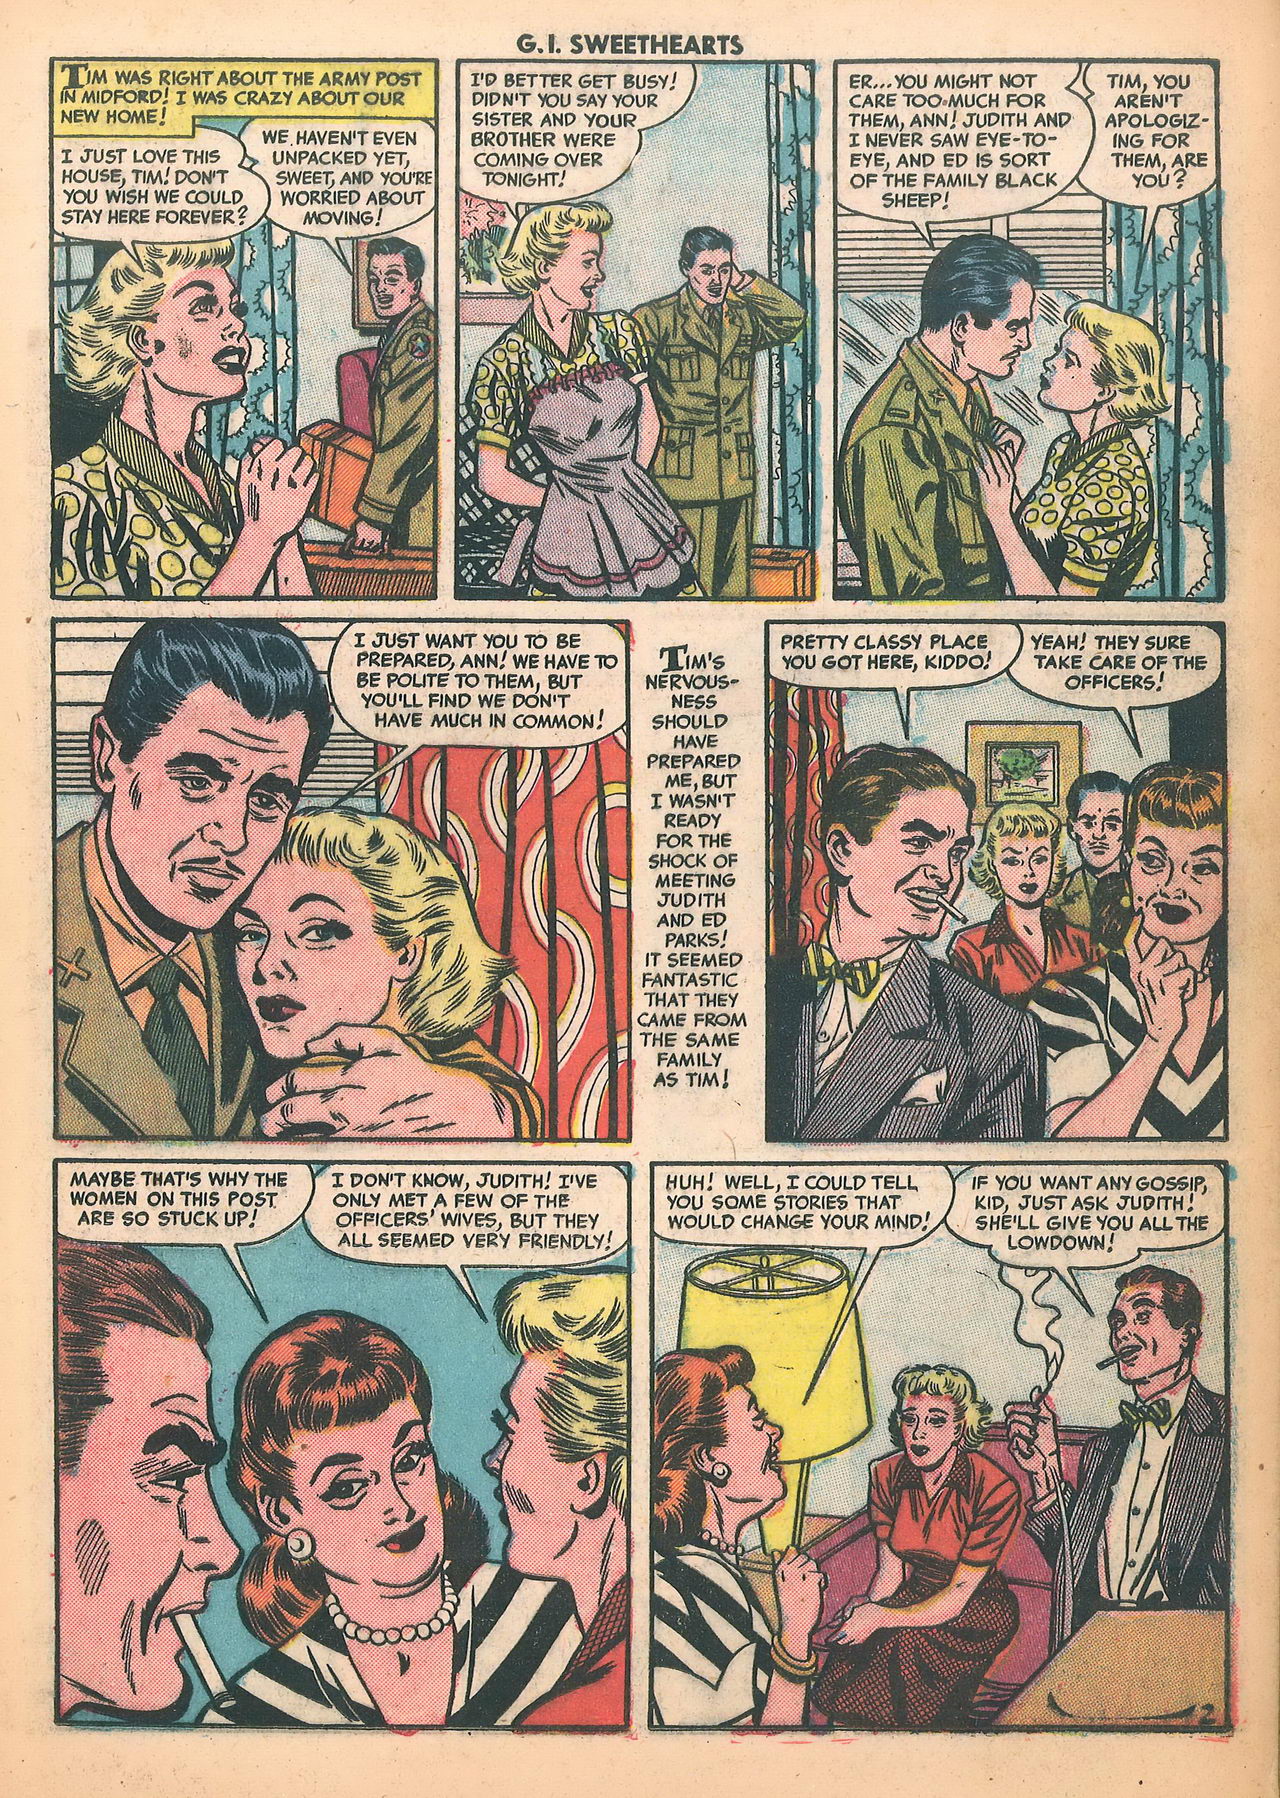 Read online G.I. Sweethearts comic -  Issue #37 - 13